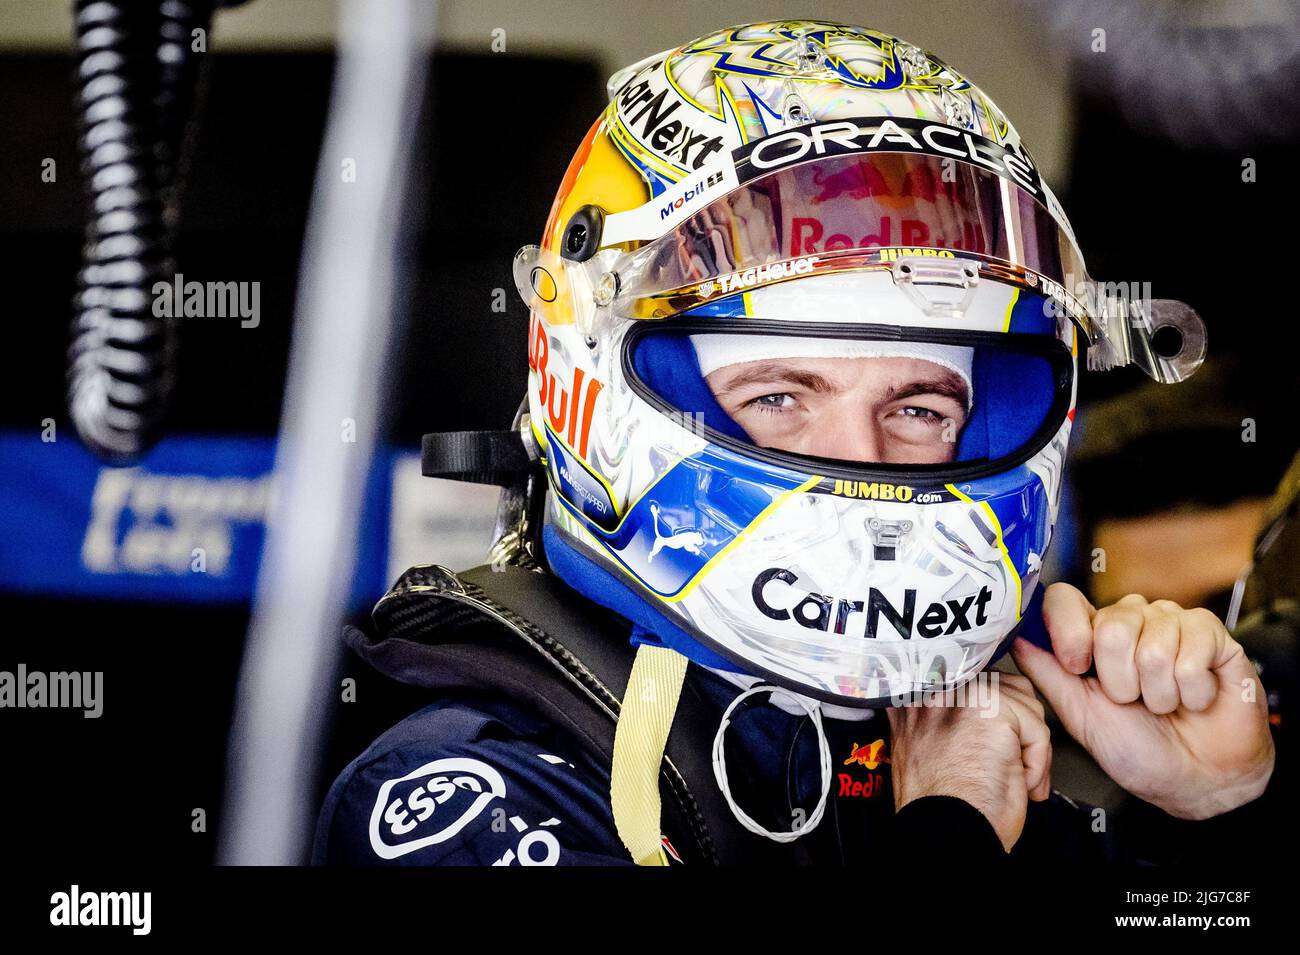 SPIELBERG - Max Verstappen (Red Bull) puts on his specially designed helmet in the pit box during practice 1 ahead of the F1 Grand Prix of Austria at the Red Bull Ring on July 8, 2022 in Spielberg, Austria. ANP SEM VAN DER WAL Credit: ANP/Alamy Live News Stock Photo